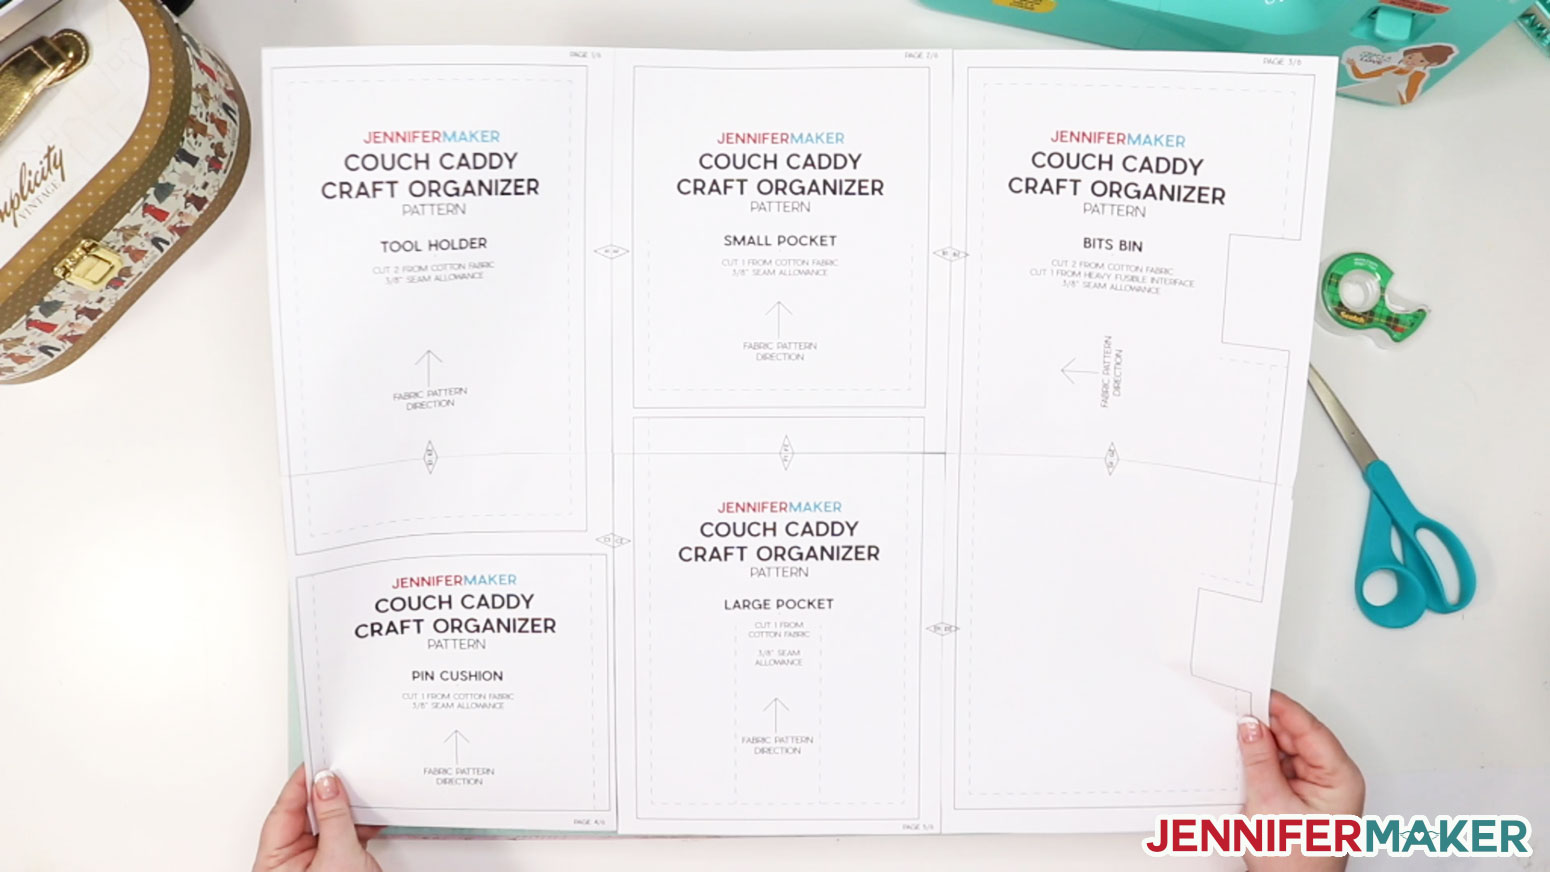 Couch Caddy craft organizer printable pattern taped together